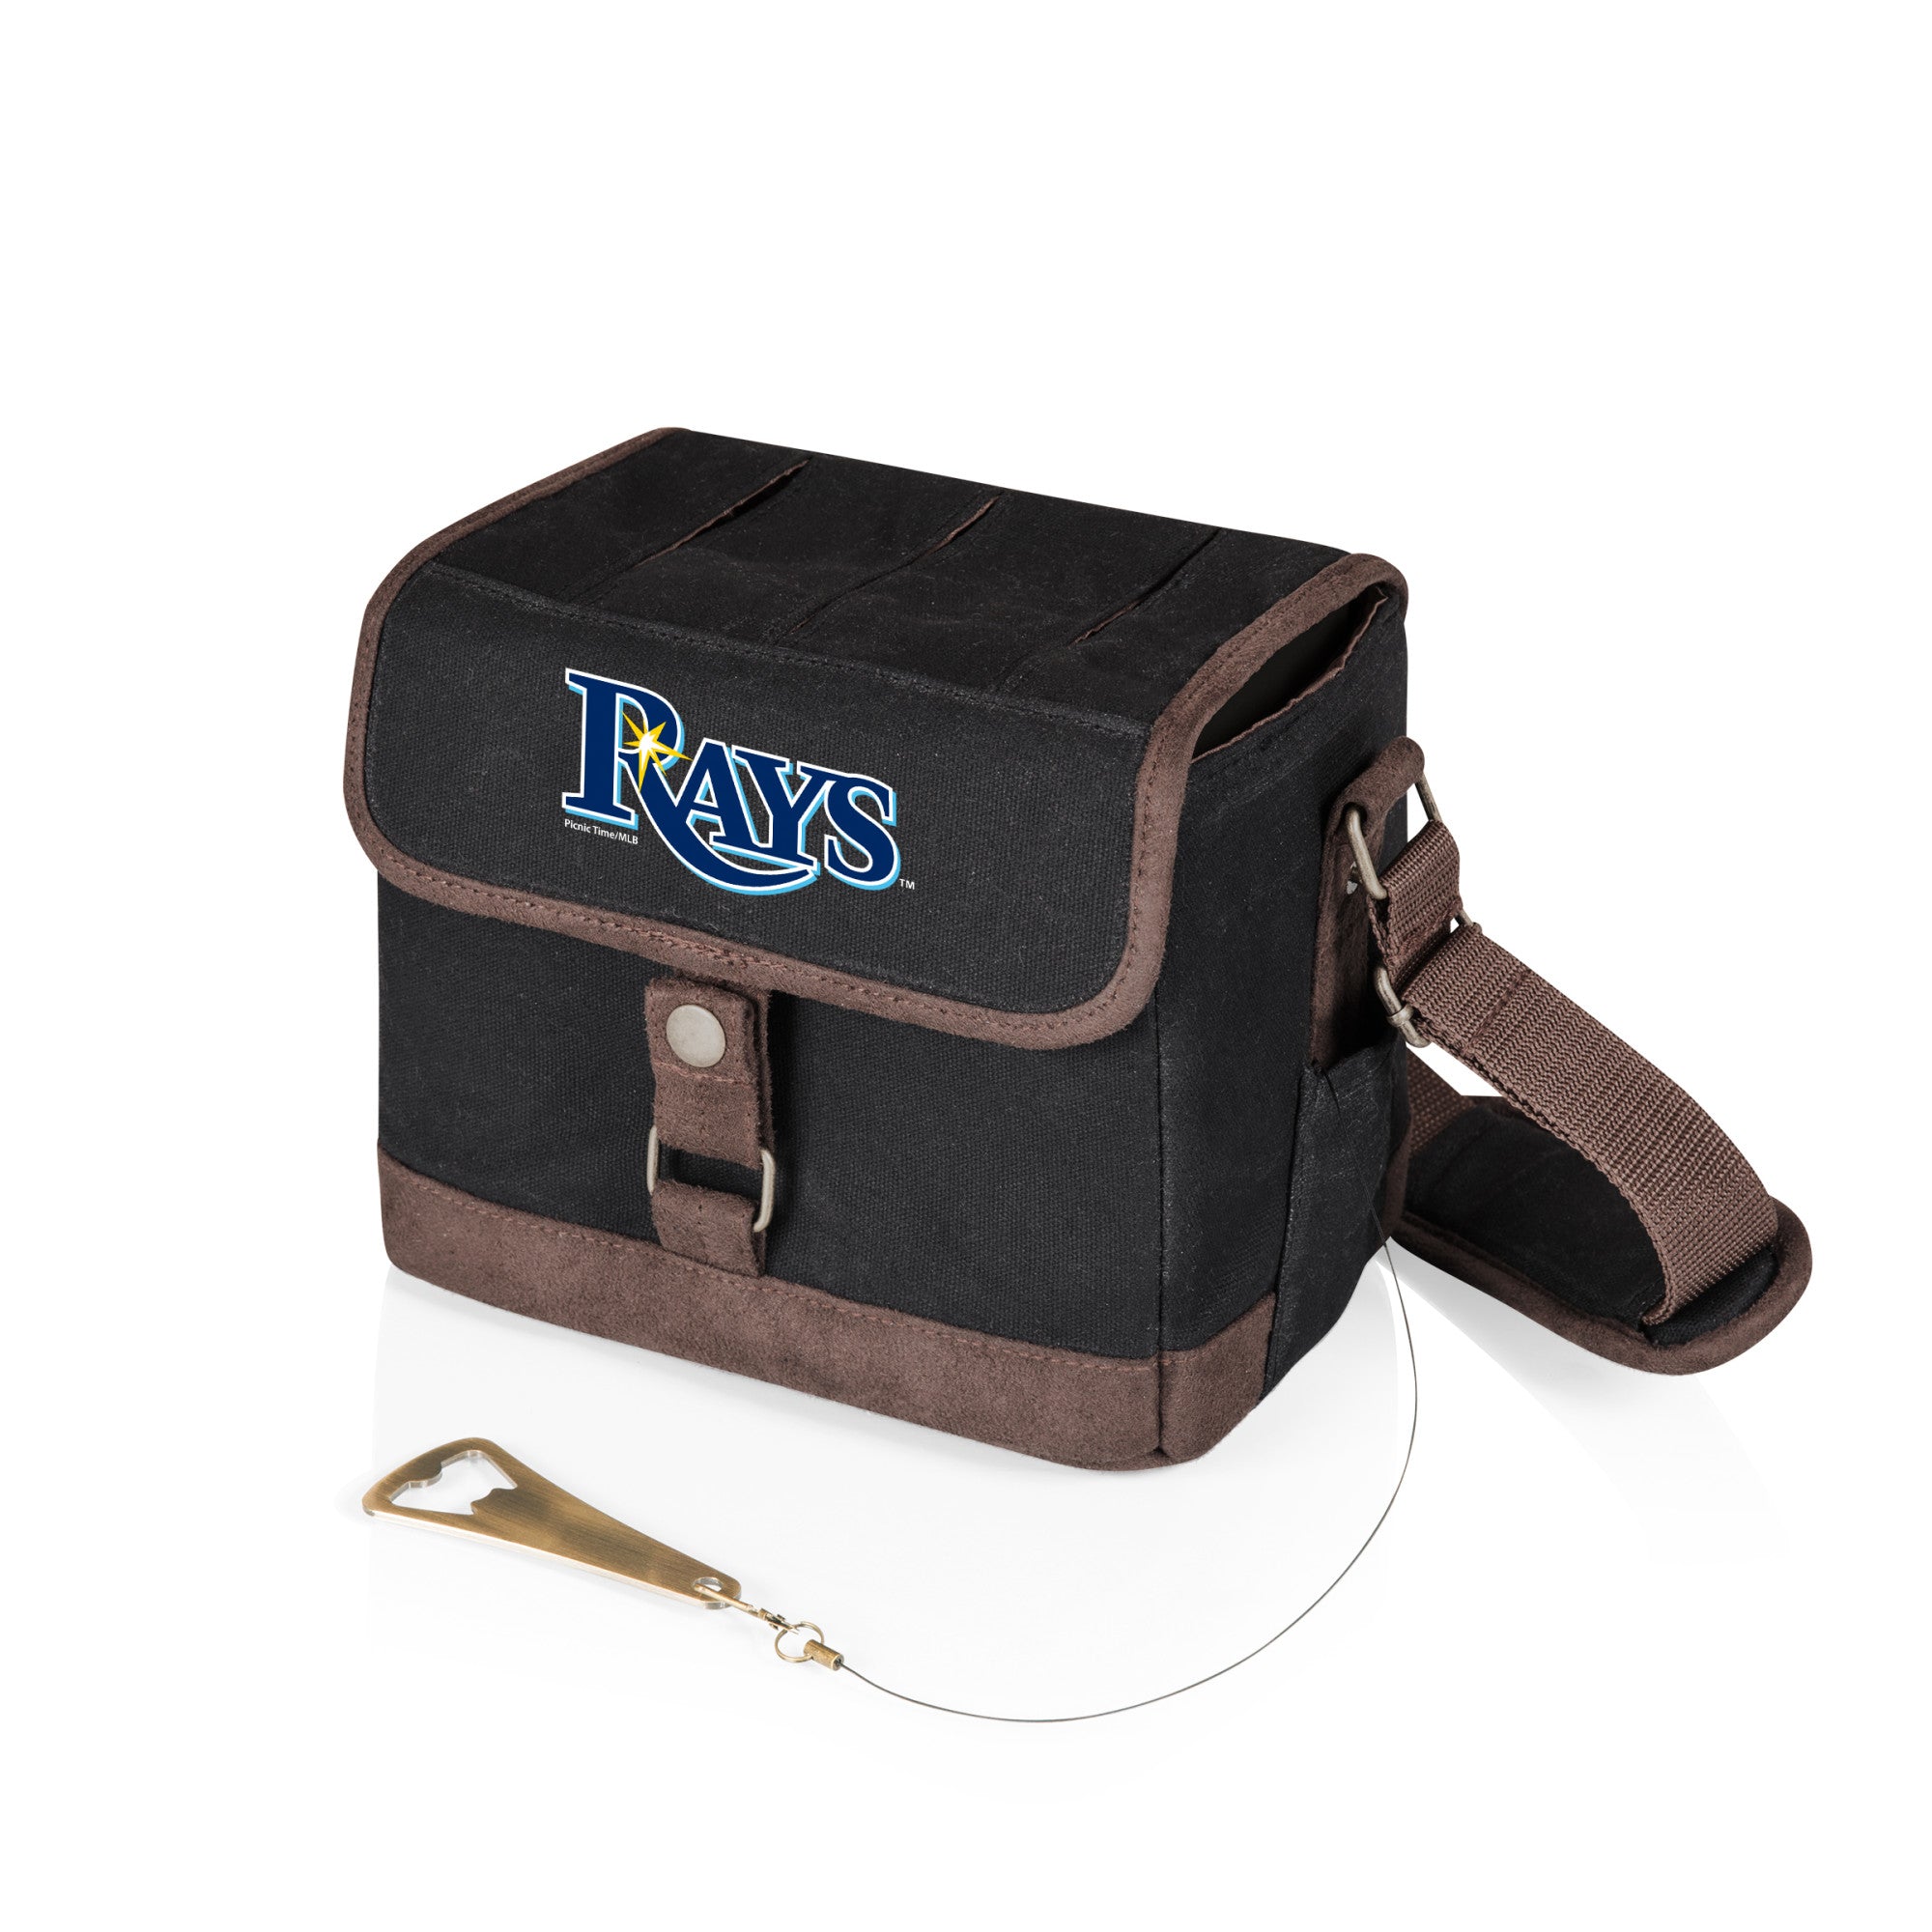 Tampa Bay Rays - Beer Caddy Cooler Tote with Opener